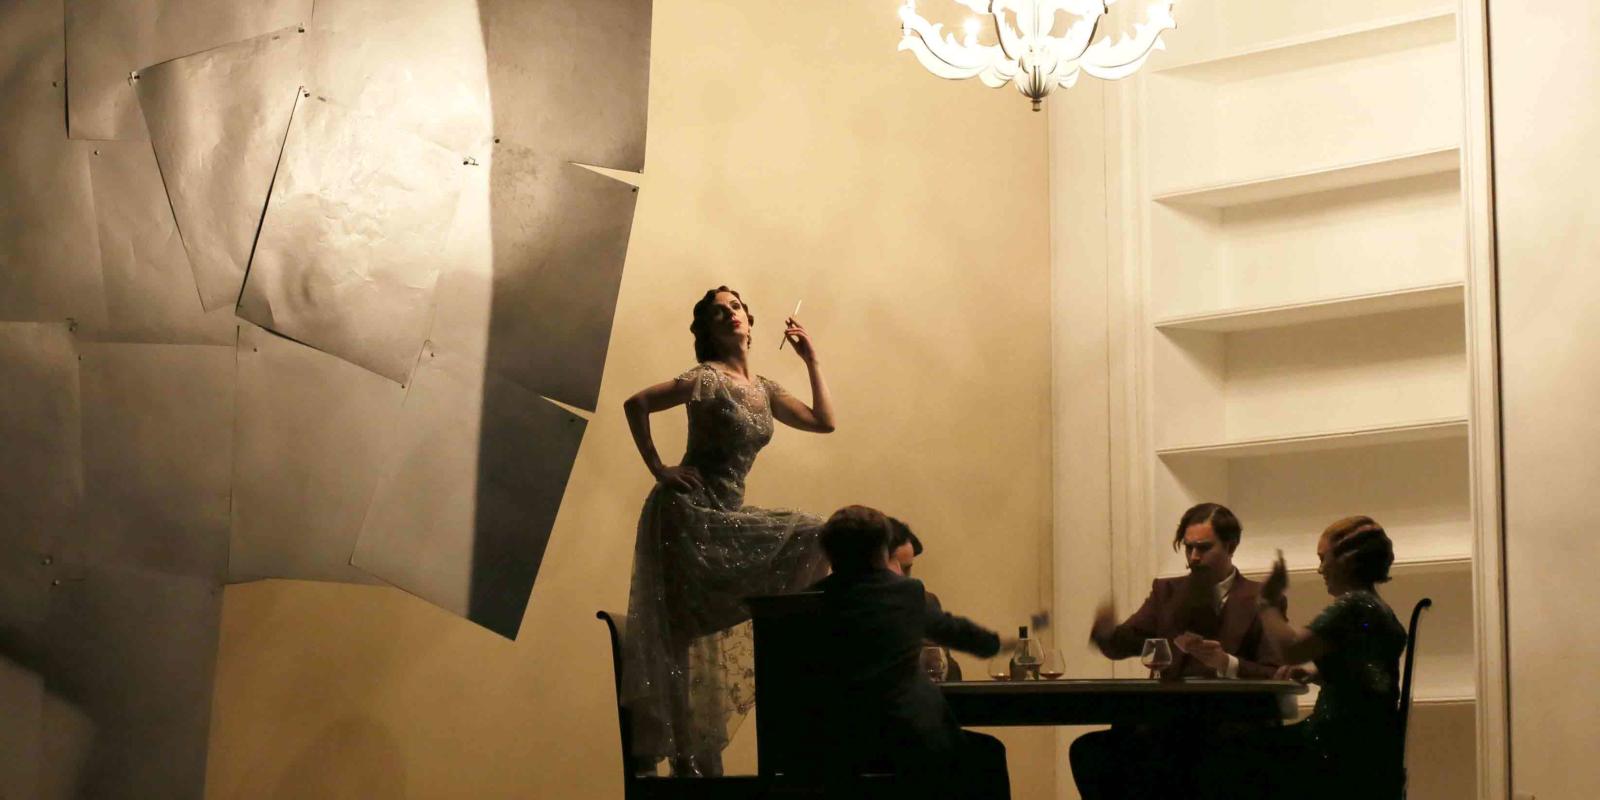 a women standing on a chair, four people sat around a table below her